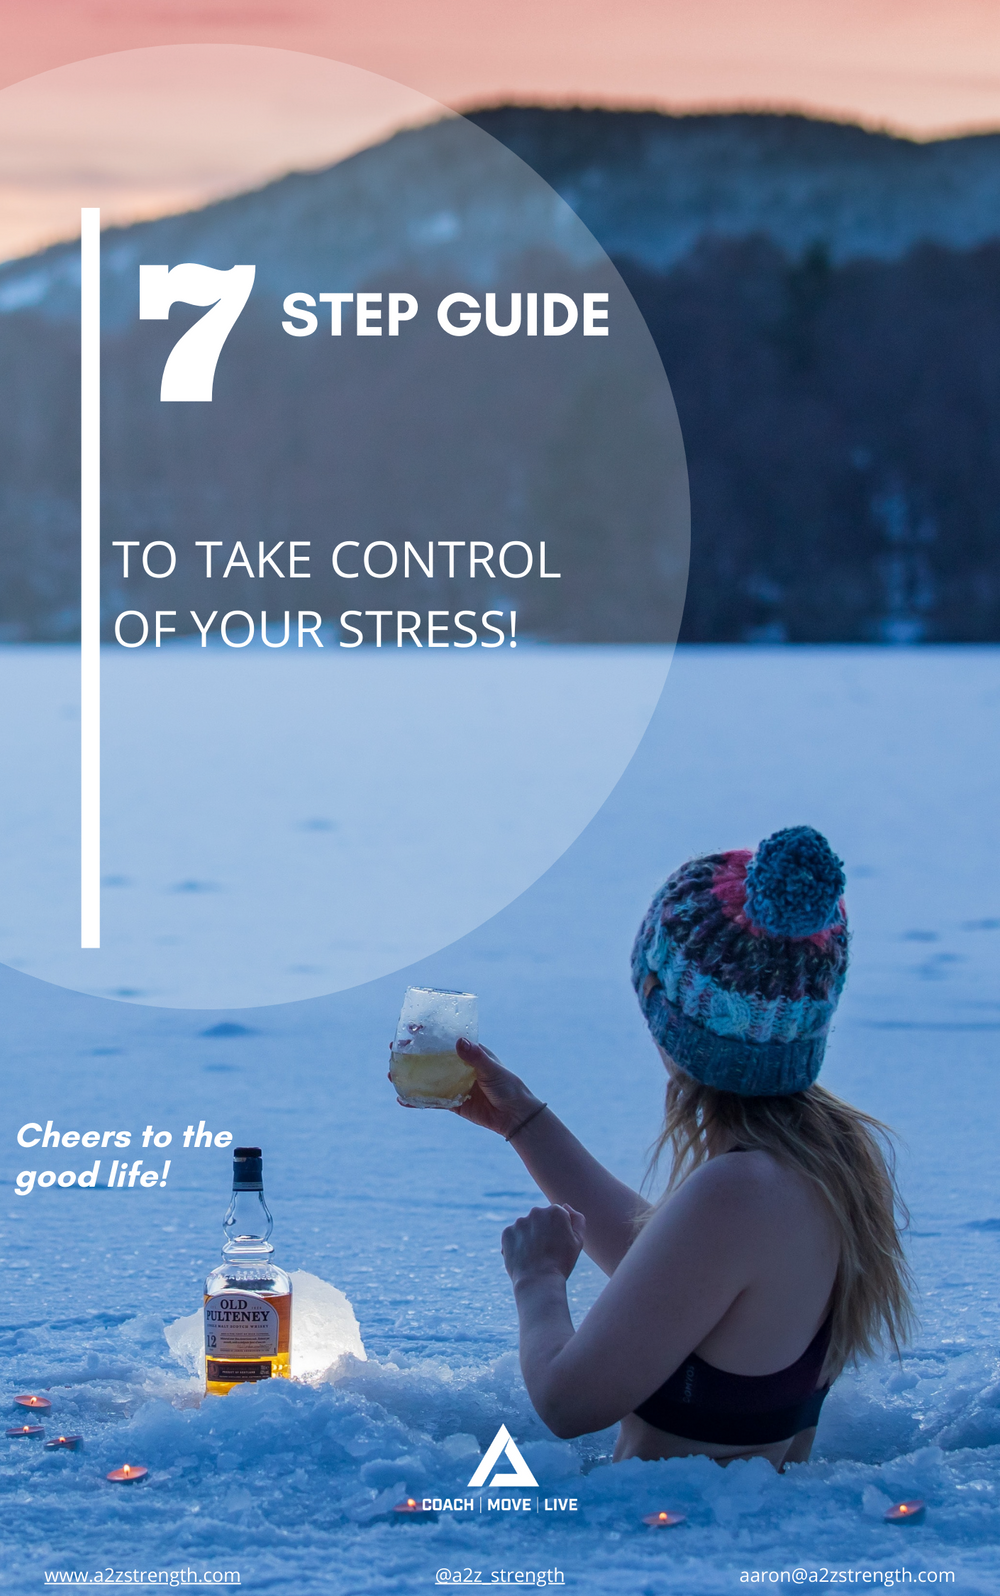 FREE 7 STEP GUIDE TO TAKING CONTROL OF YOUR STRESS